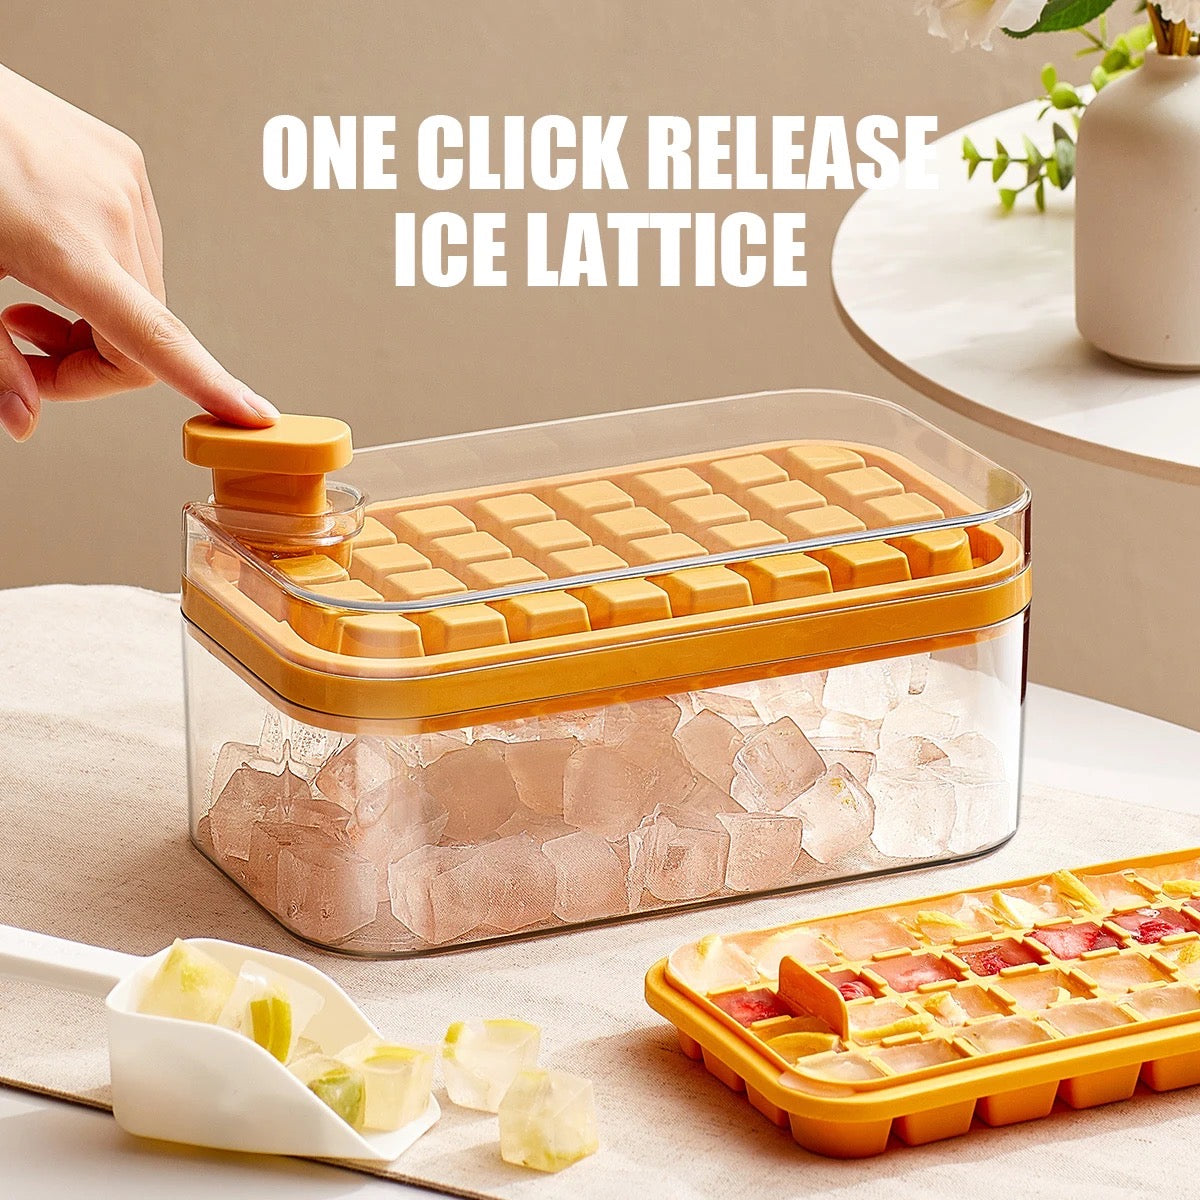 One-Press Transparent Ice Making Mold, Durable Ice Cube Mold Tray with Bin